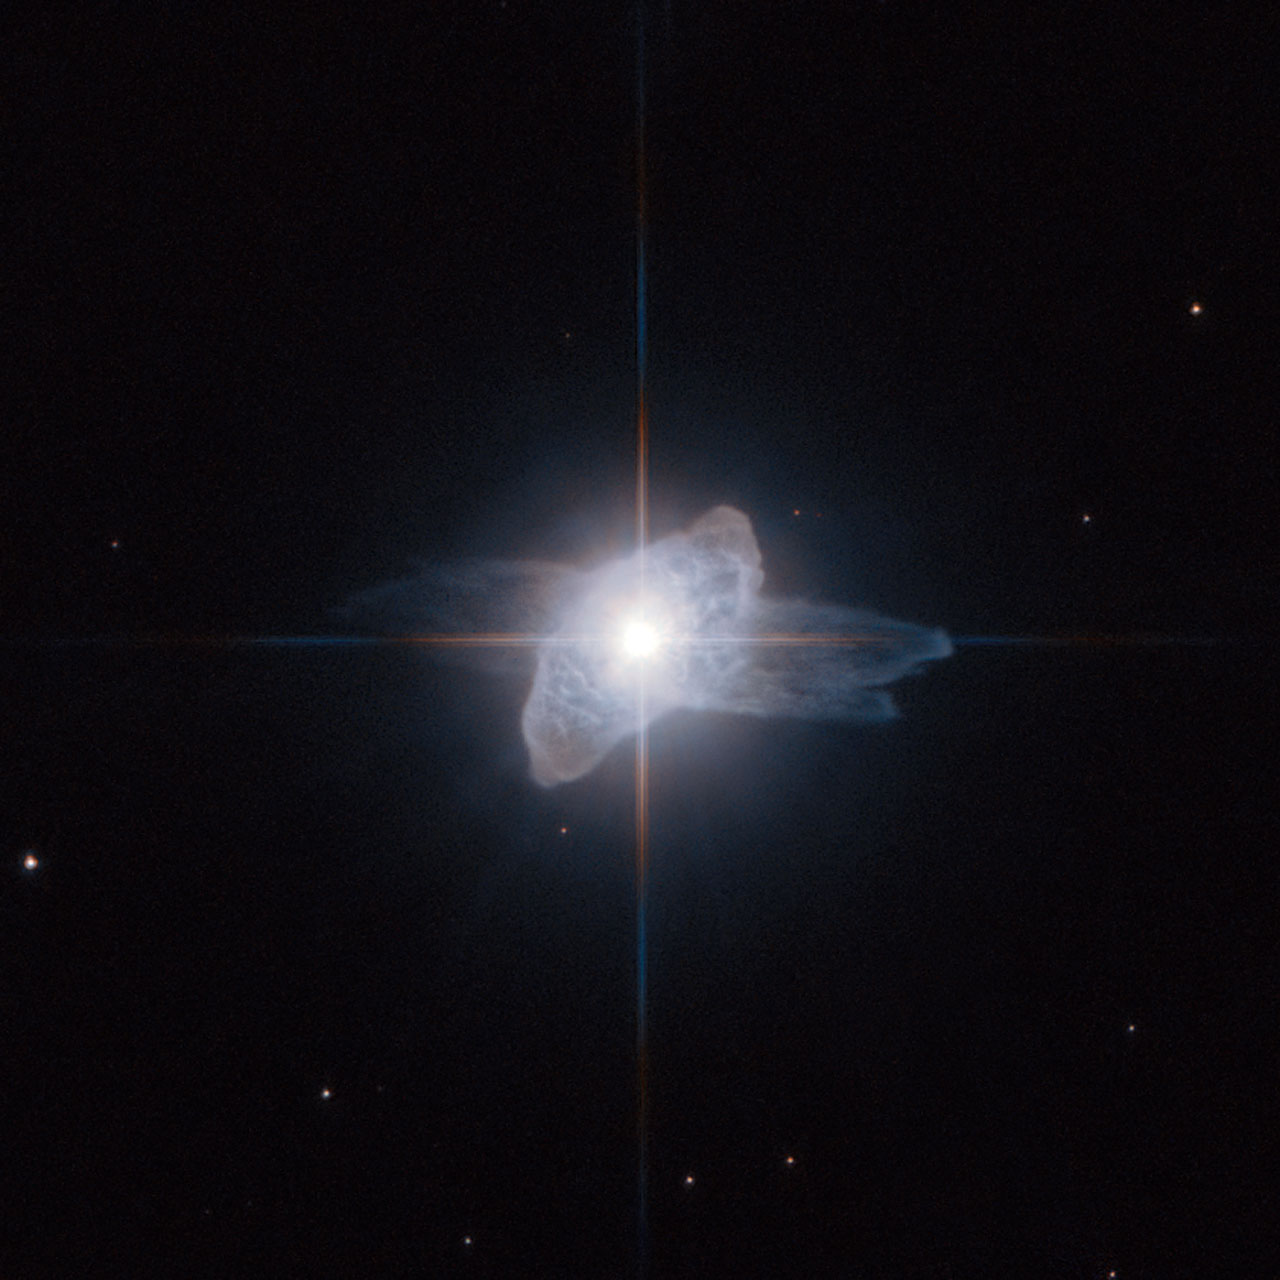 http://www.spacetelescope.org/static/archives/images/screen/potw1012a.jpg